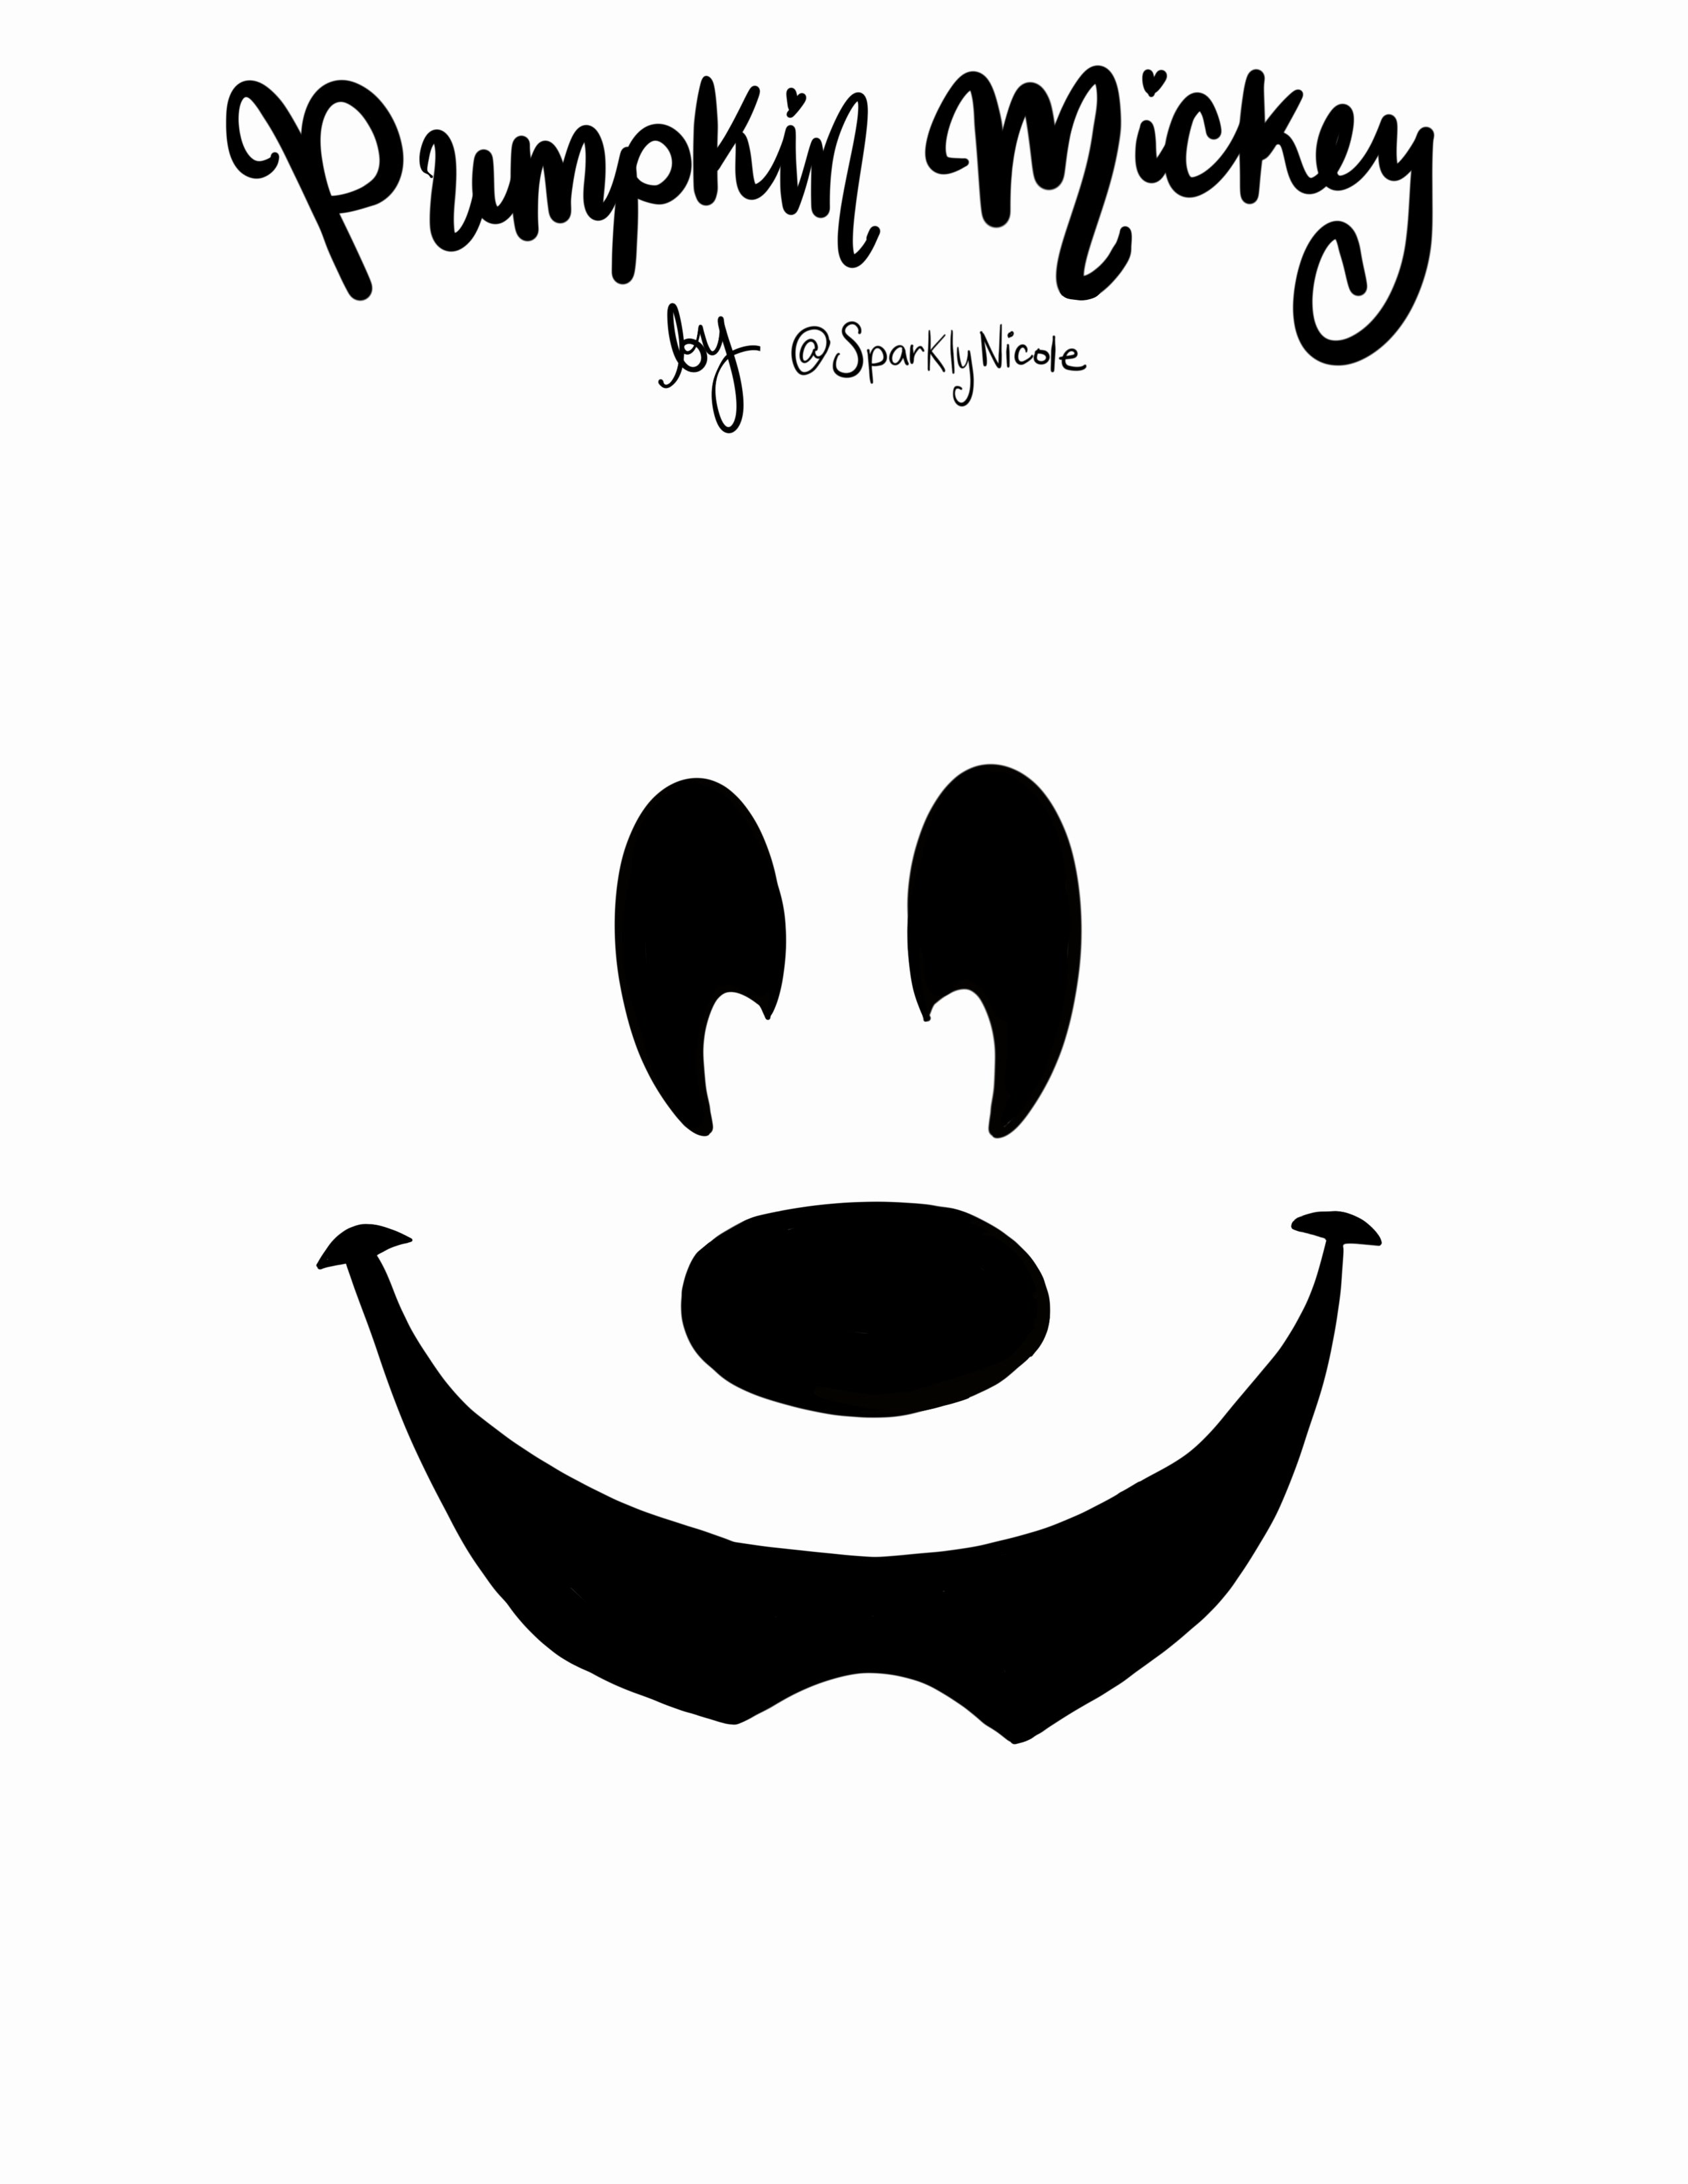 Mickey Mouse Face Template Fresh Disneyland Mickey Pumpkin Carving Stencil Sparklyeverafter